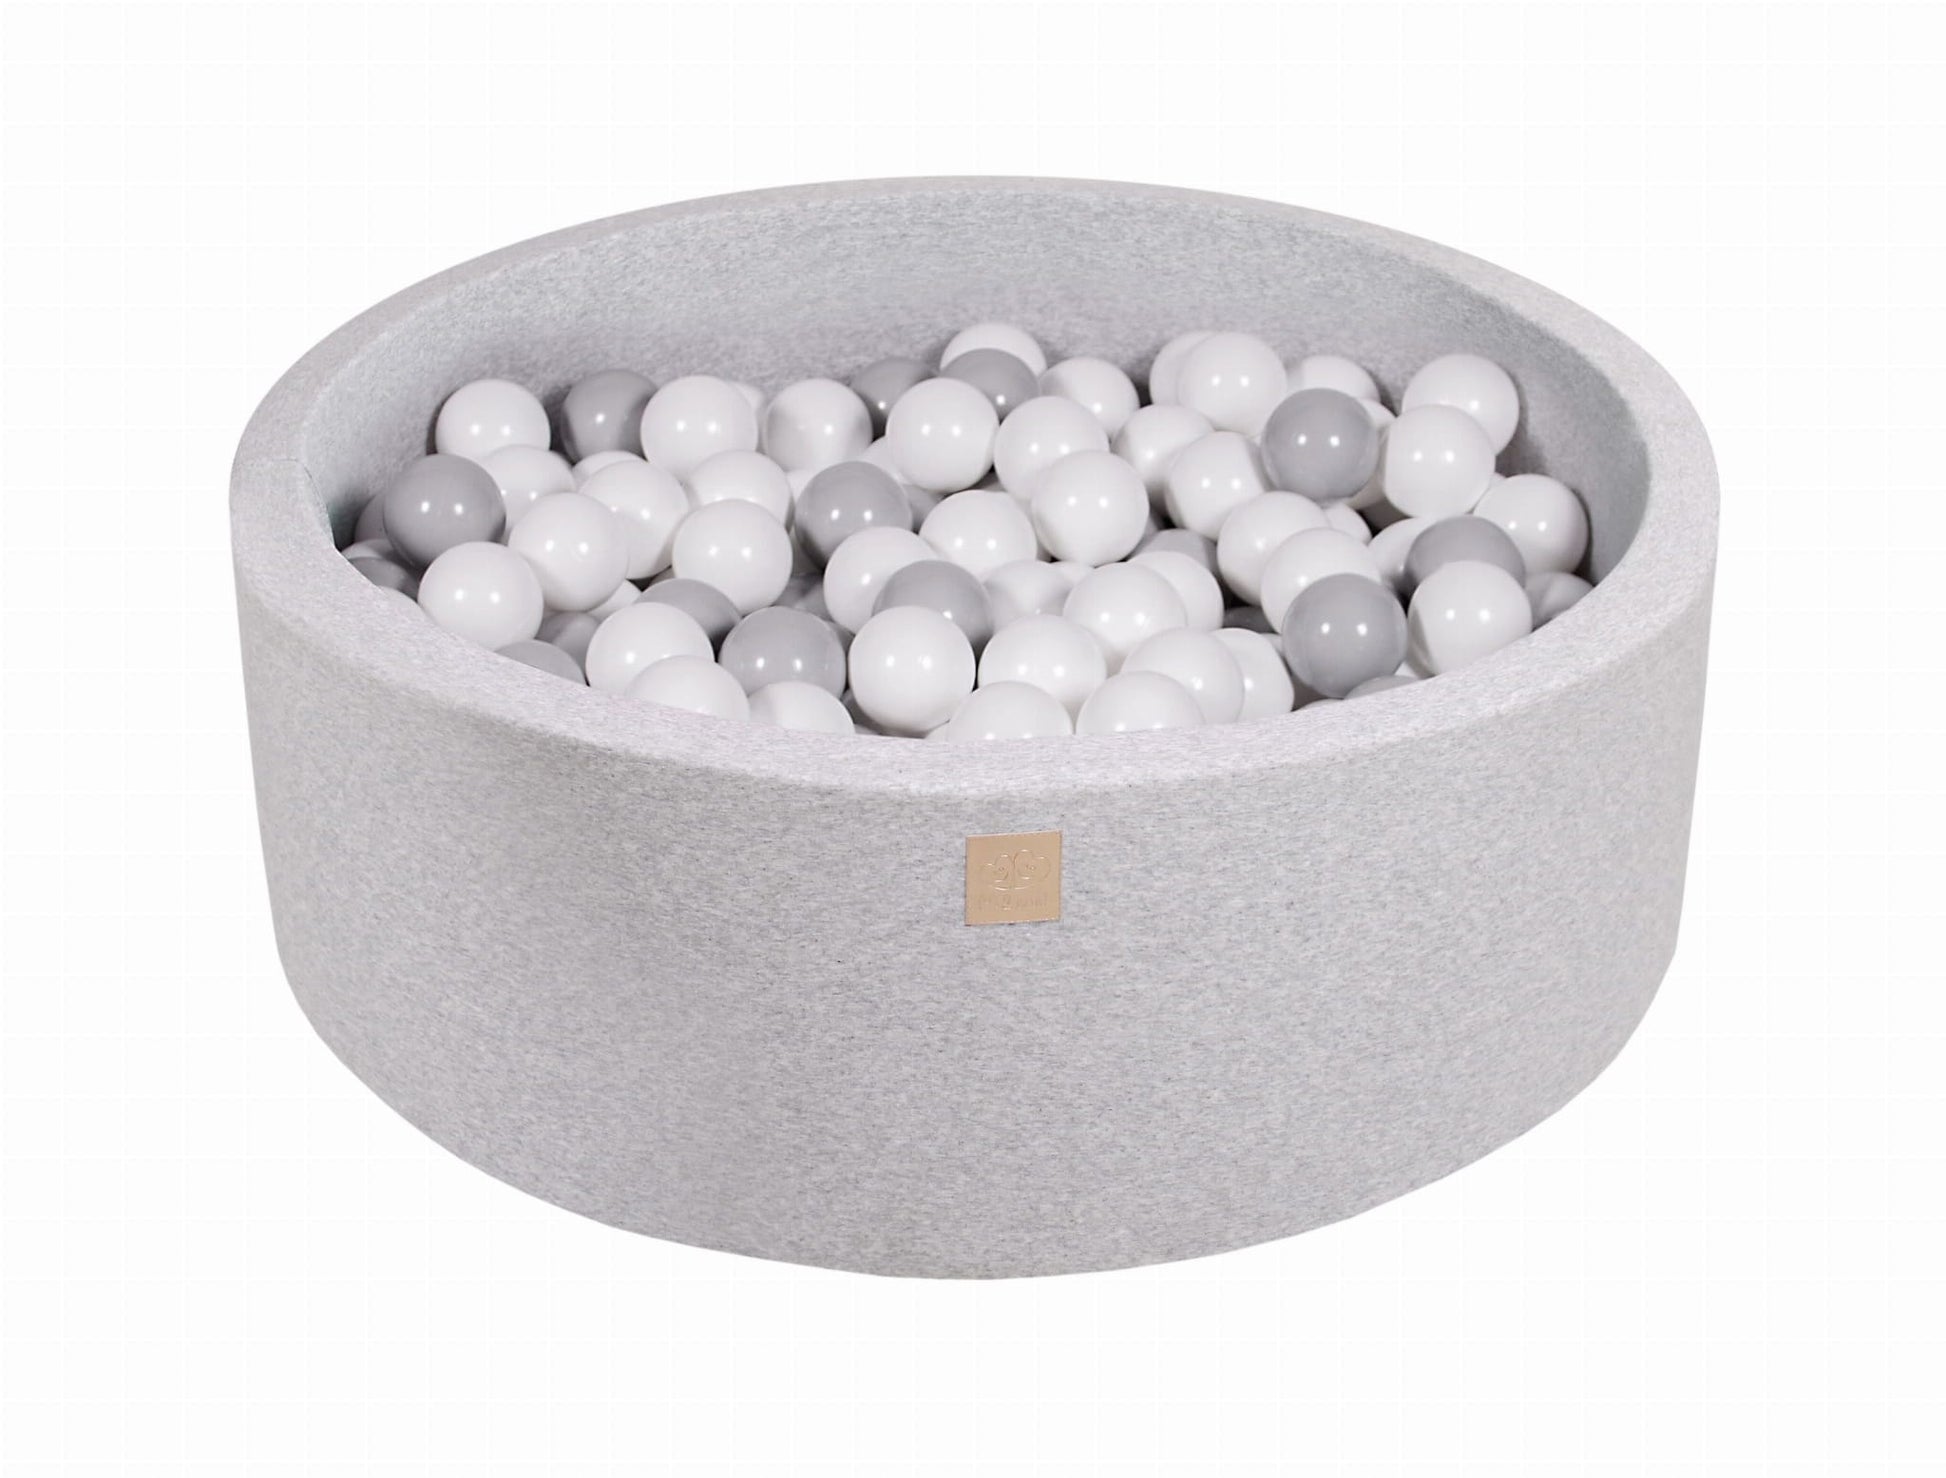 Luxury Cotton Round Ball Pit - Smooth 'n Pure For Kids By MeowBaby - Stylemykid.com